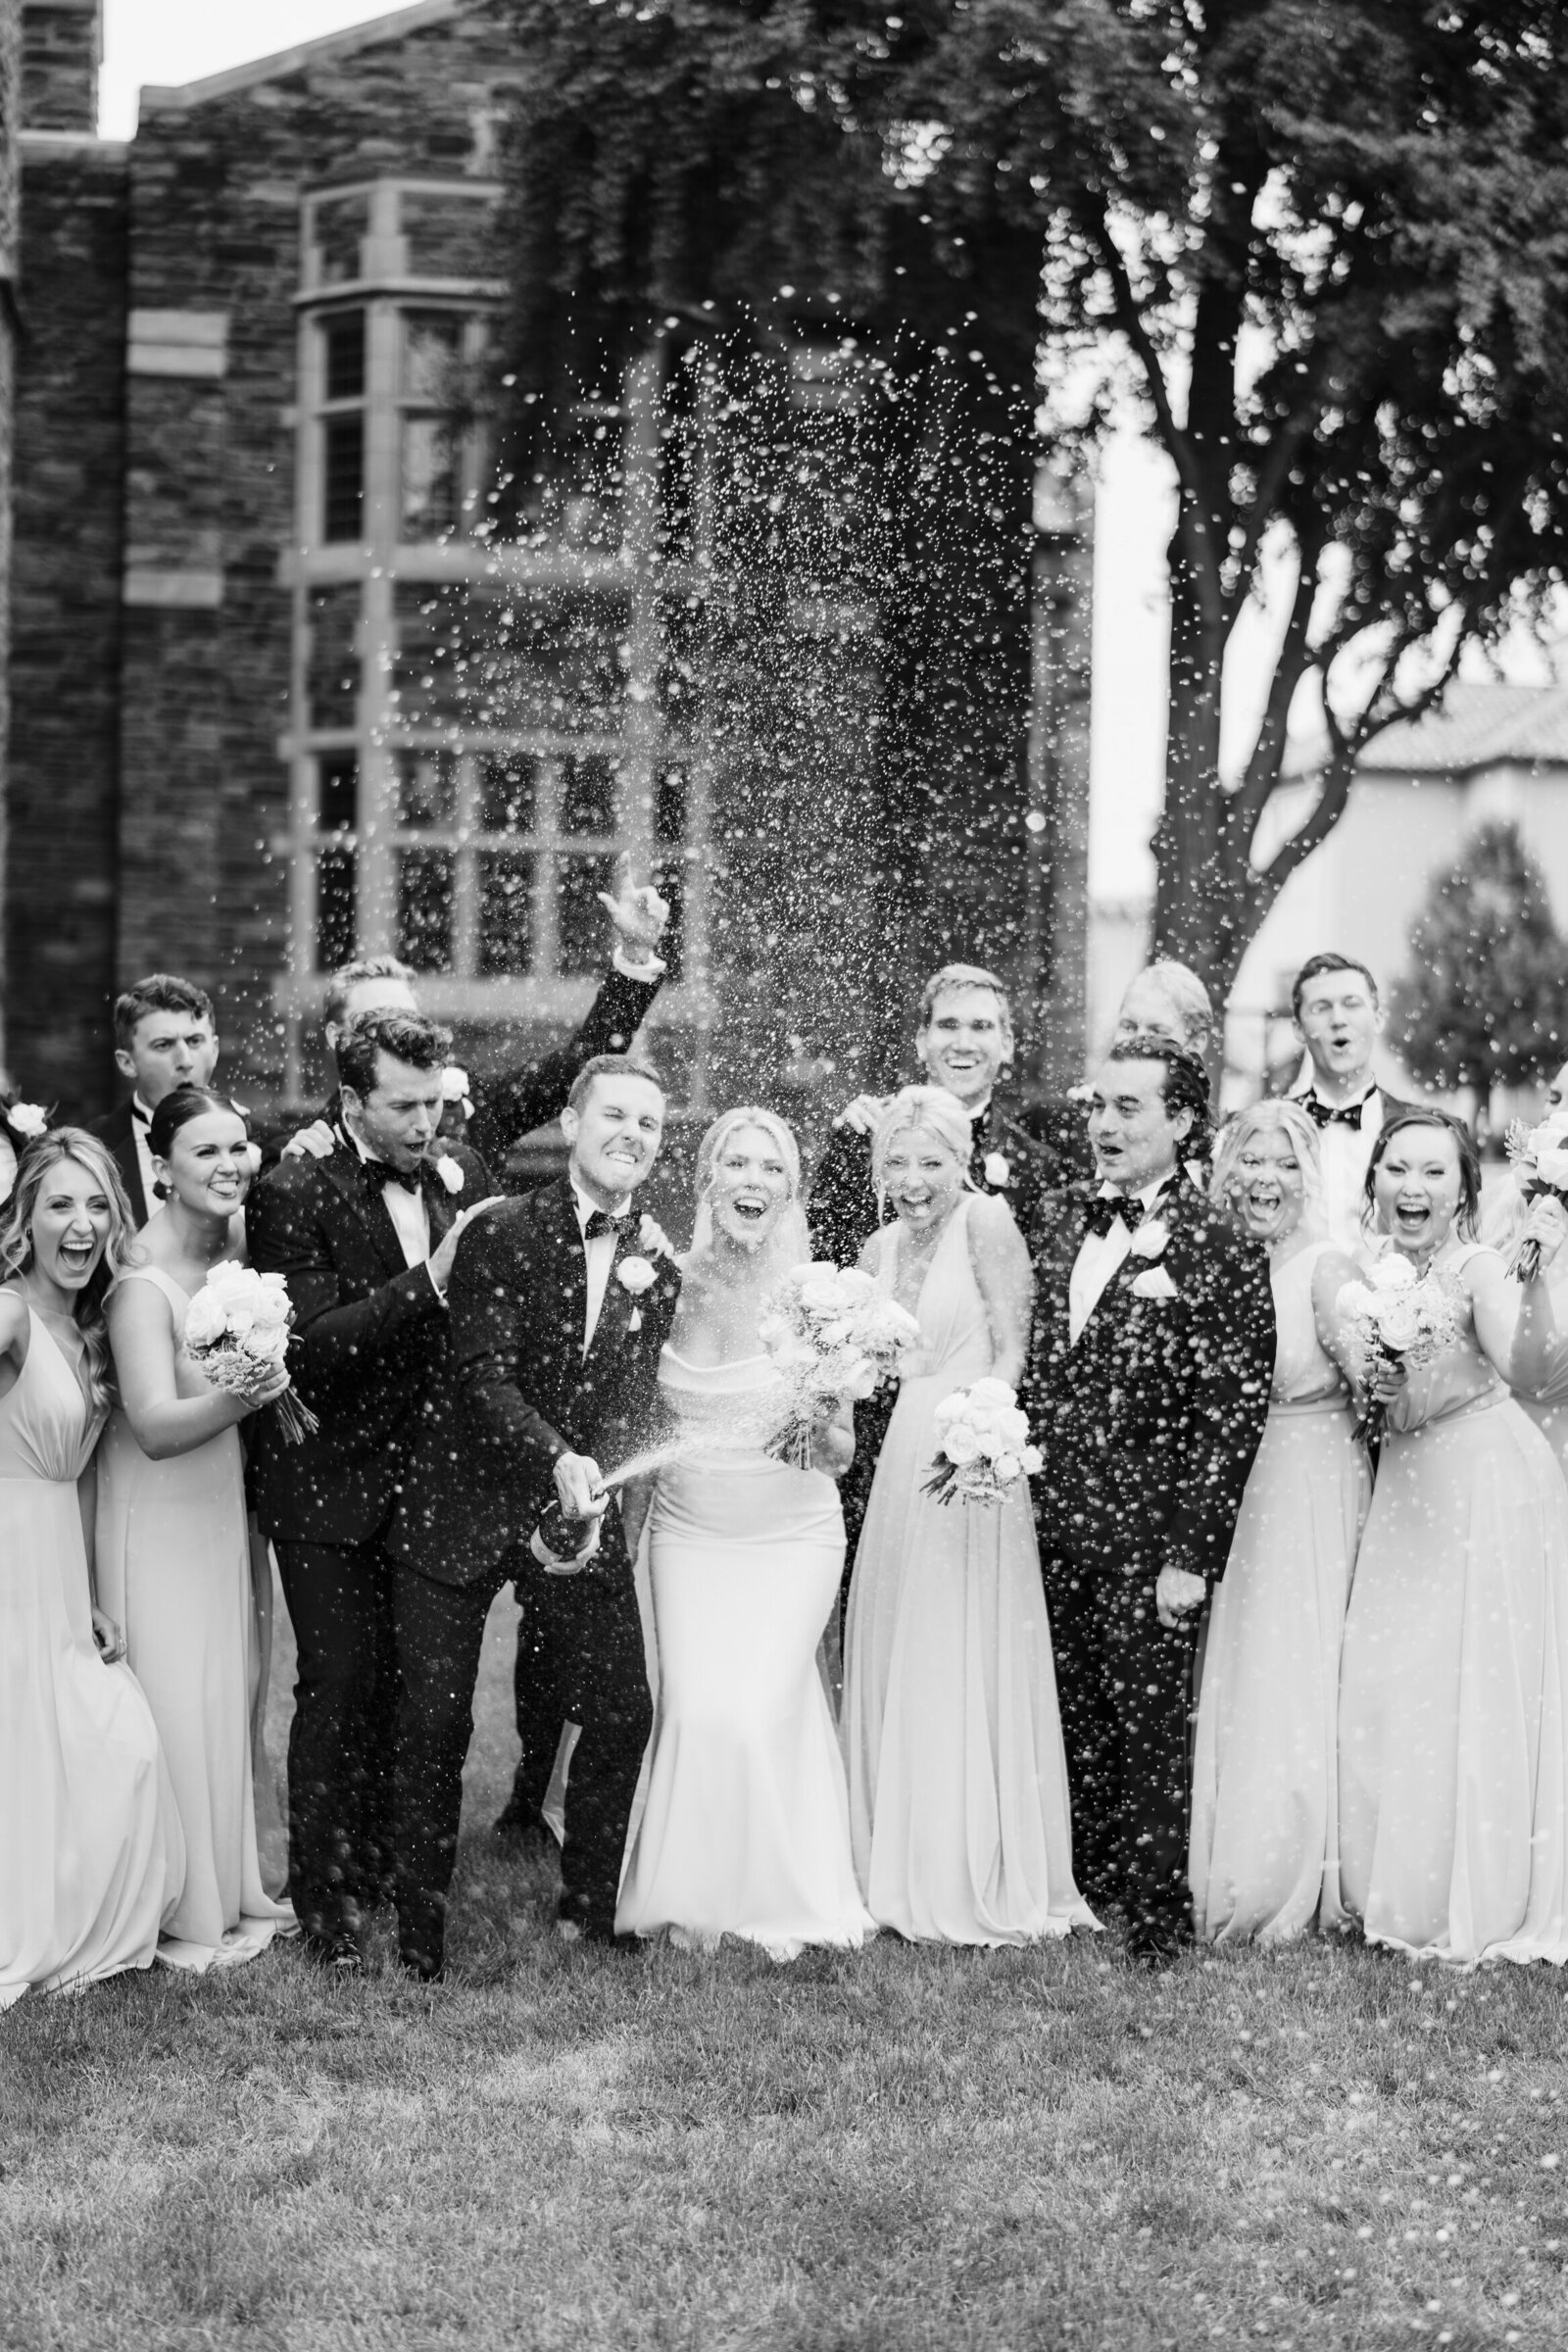 Groom pops open a bottle of champagne while the bride and the wedding party cheer